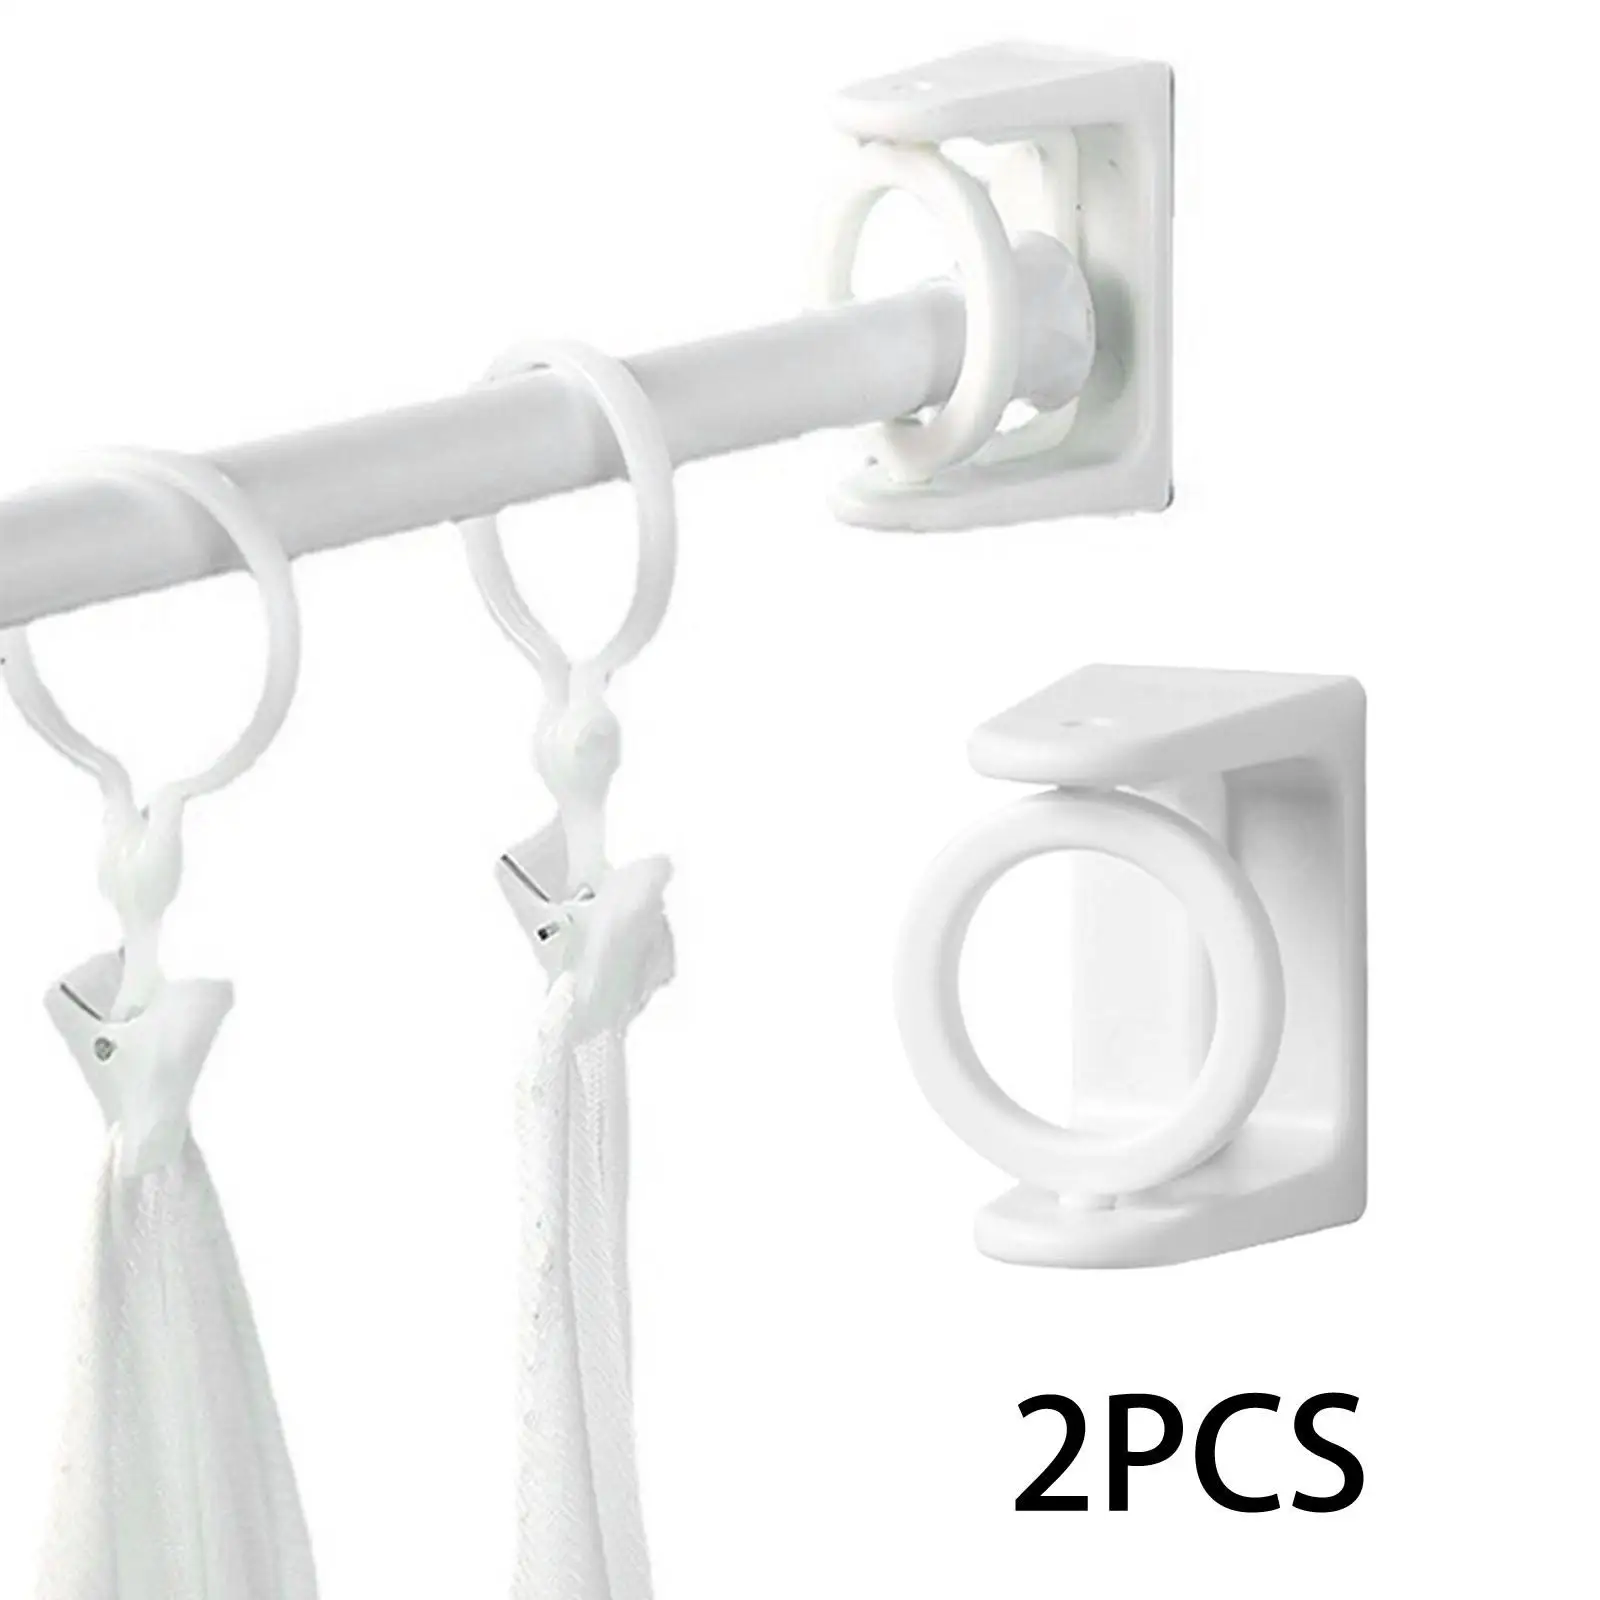 Plastic Curtain Rod Brackets Holder Hook Rotatable Nail Free for Living Room